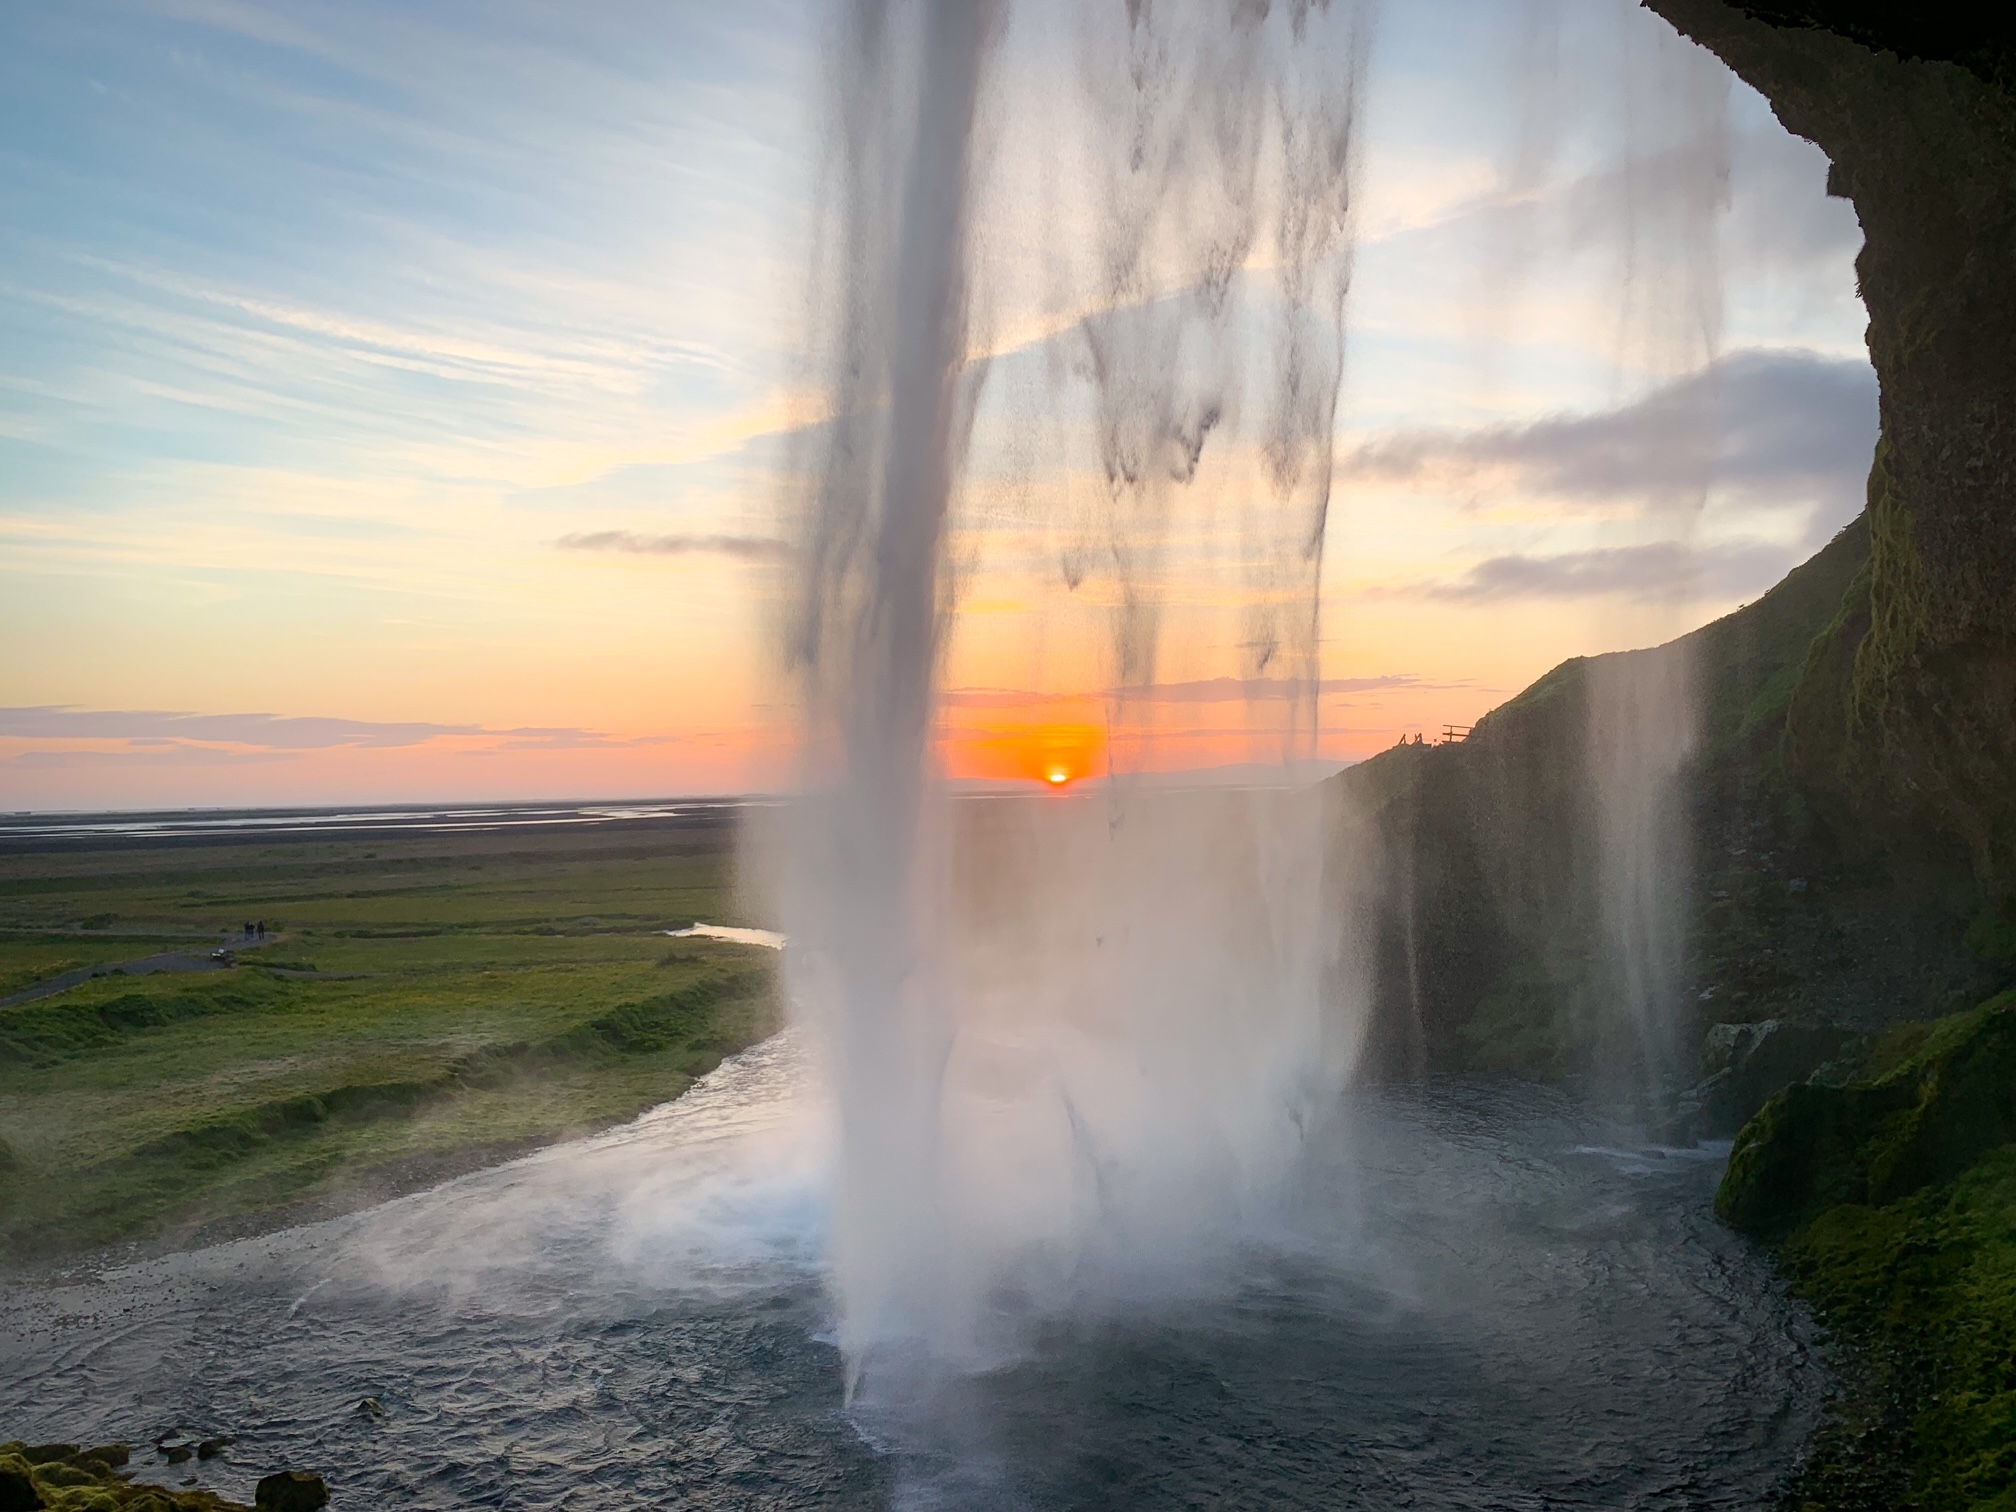 The view from behind the falls as the sun is setting on the horizon in the distance. Beyond the falls all you can see is miles of green fields. 